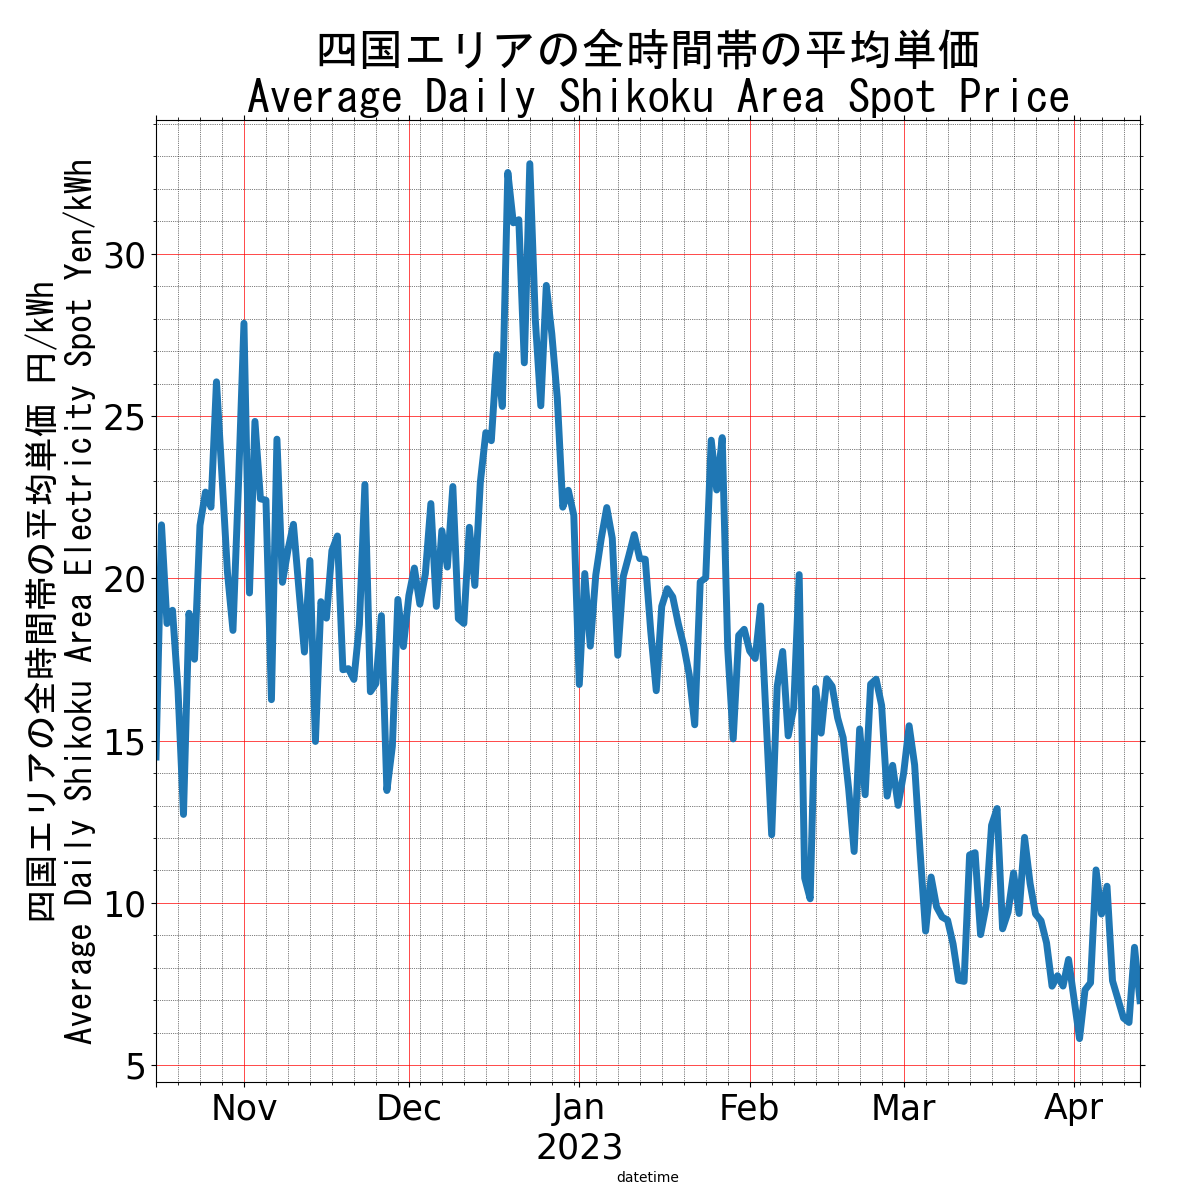 Japanese Electricity JEPX Shikoku Area Price plotted over time for the last 90 days